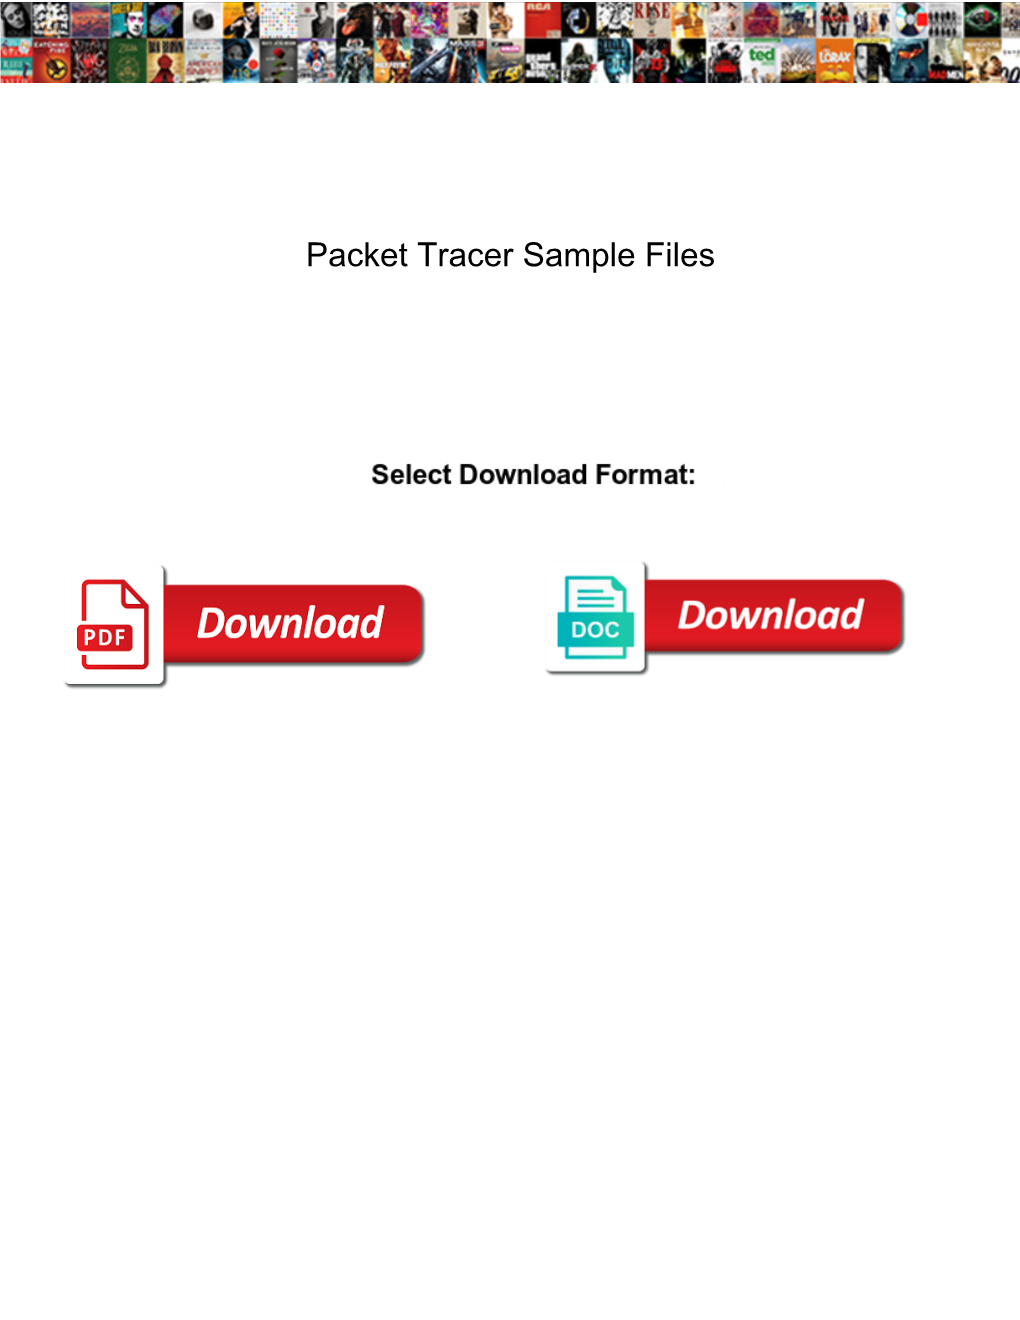 Packet Tracer Sample Files